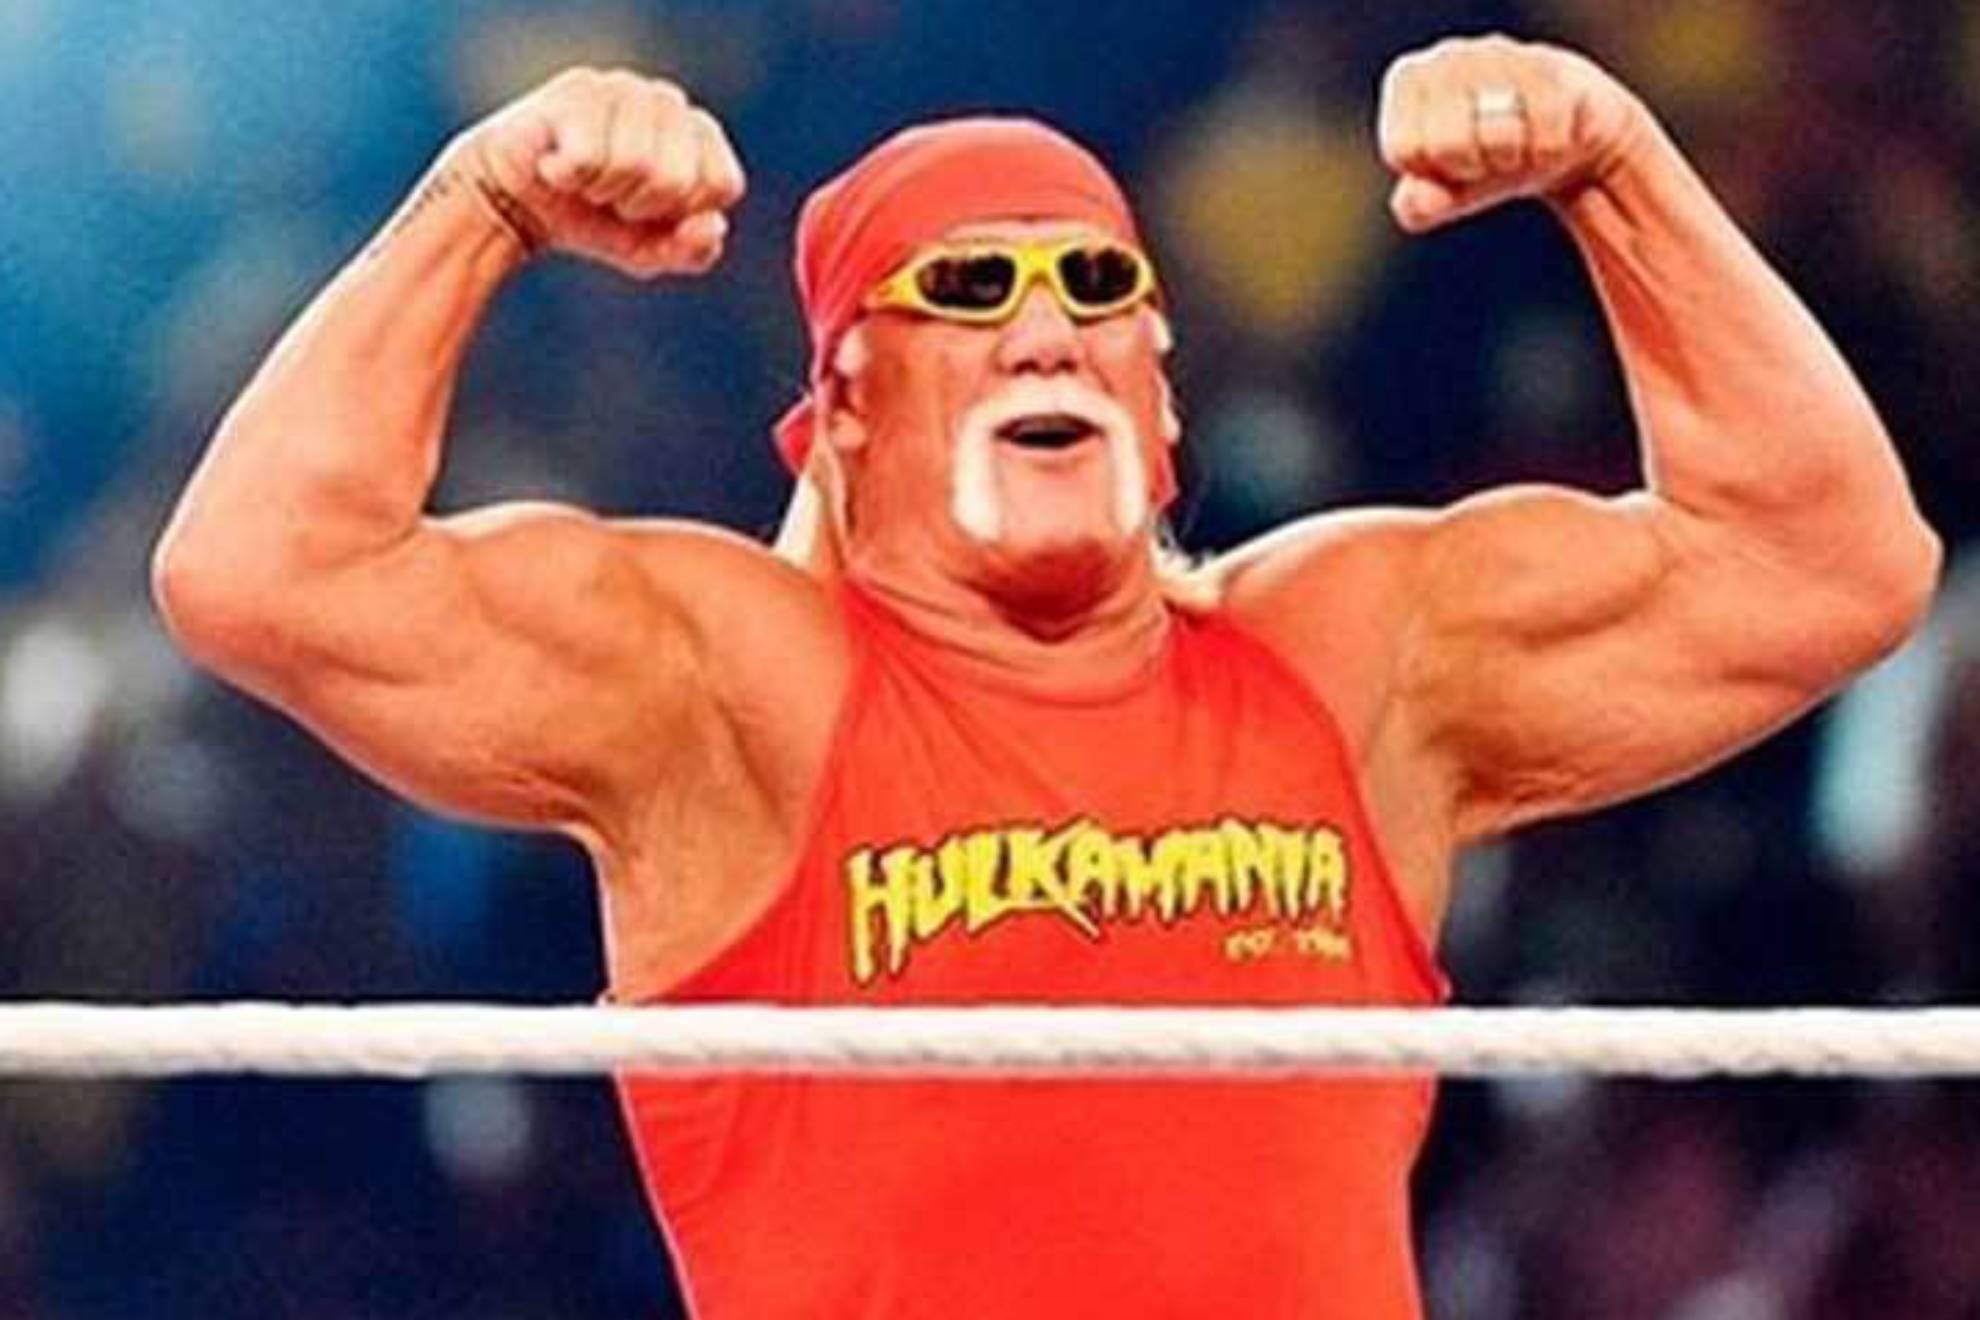 15+ Best Hulk Hogan Costumes For Adults, Kids, and Pets